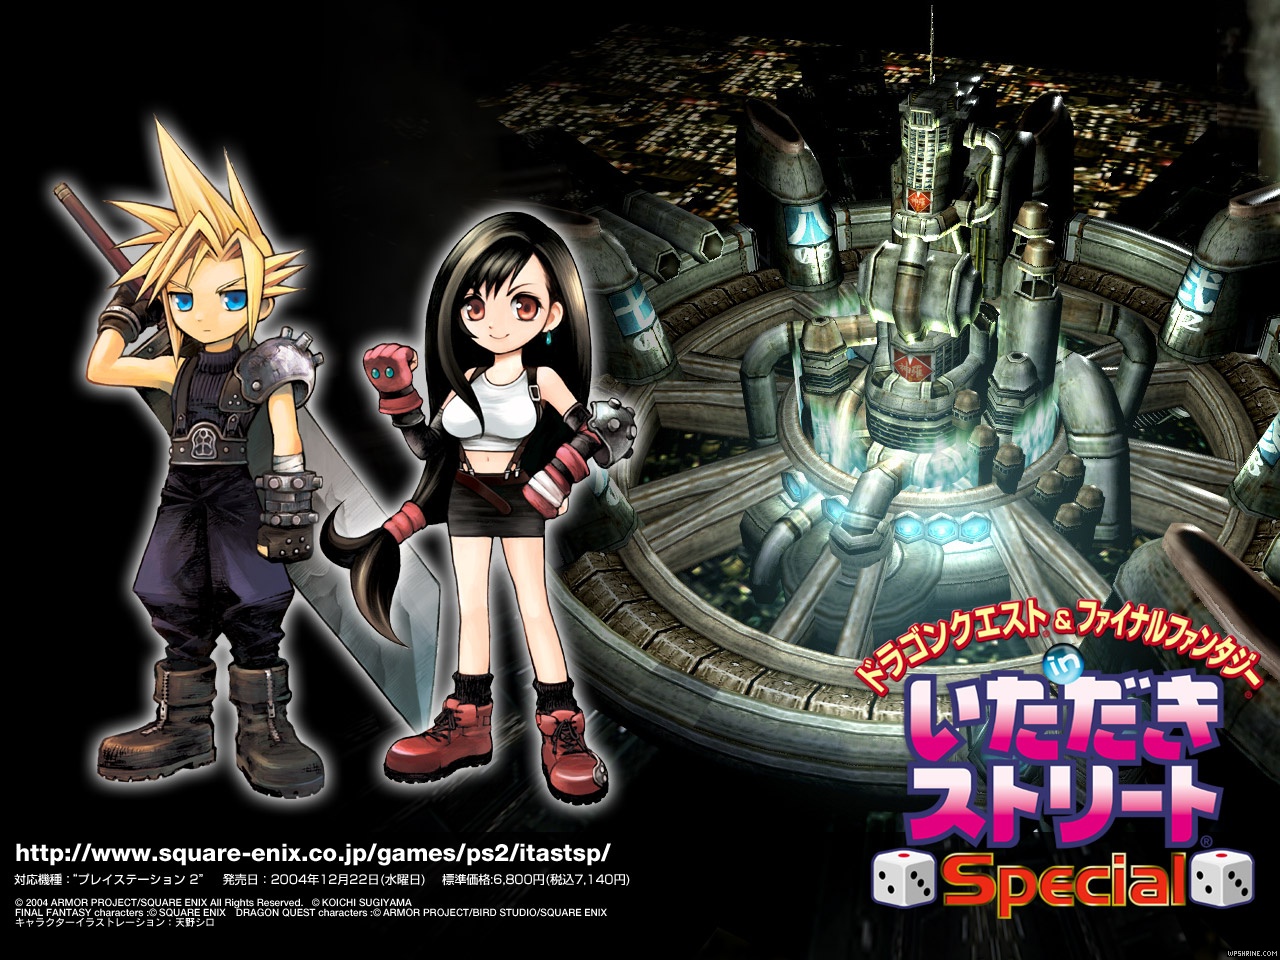 Square Enix Poster | Final Fantasy 7 & spinoffs wallpaper | The ...